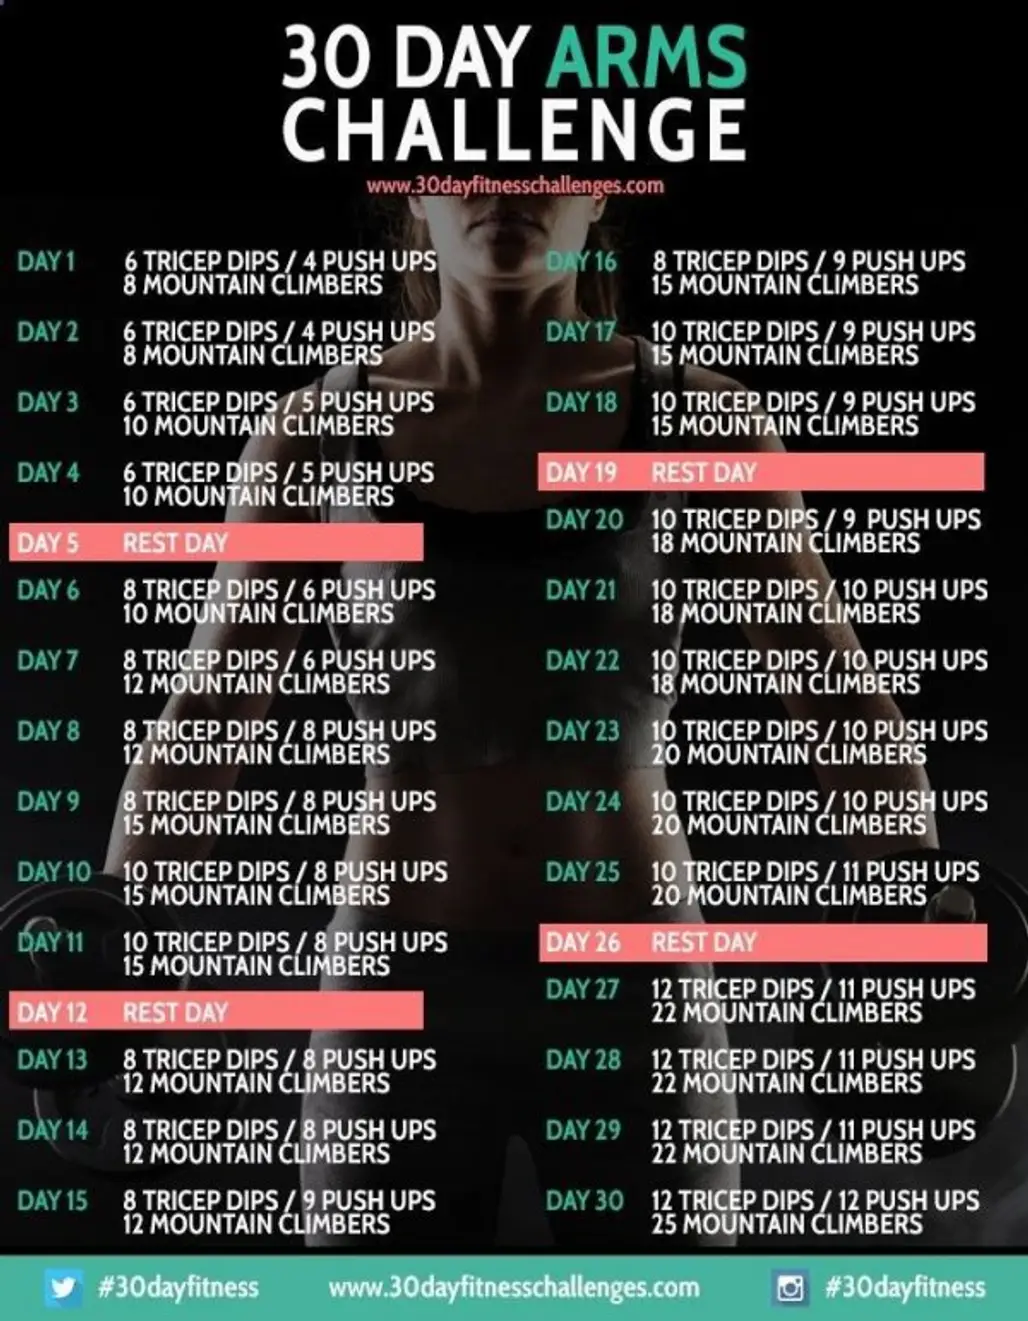 30 Day Arms Challenge